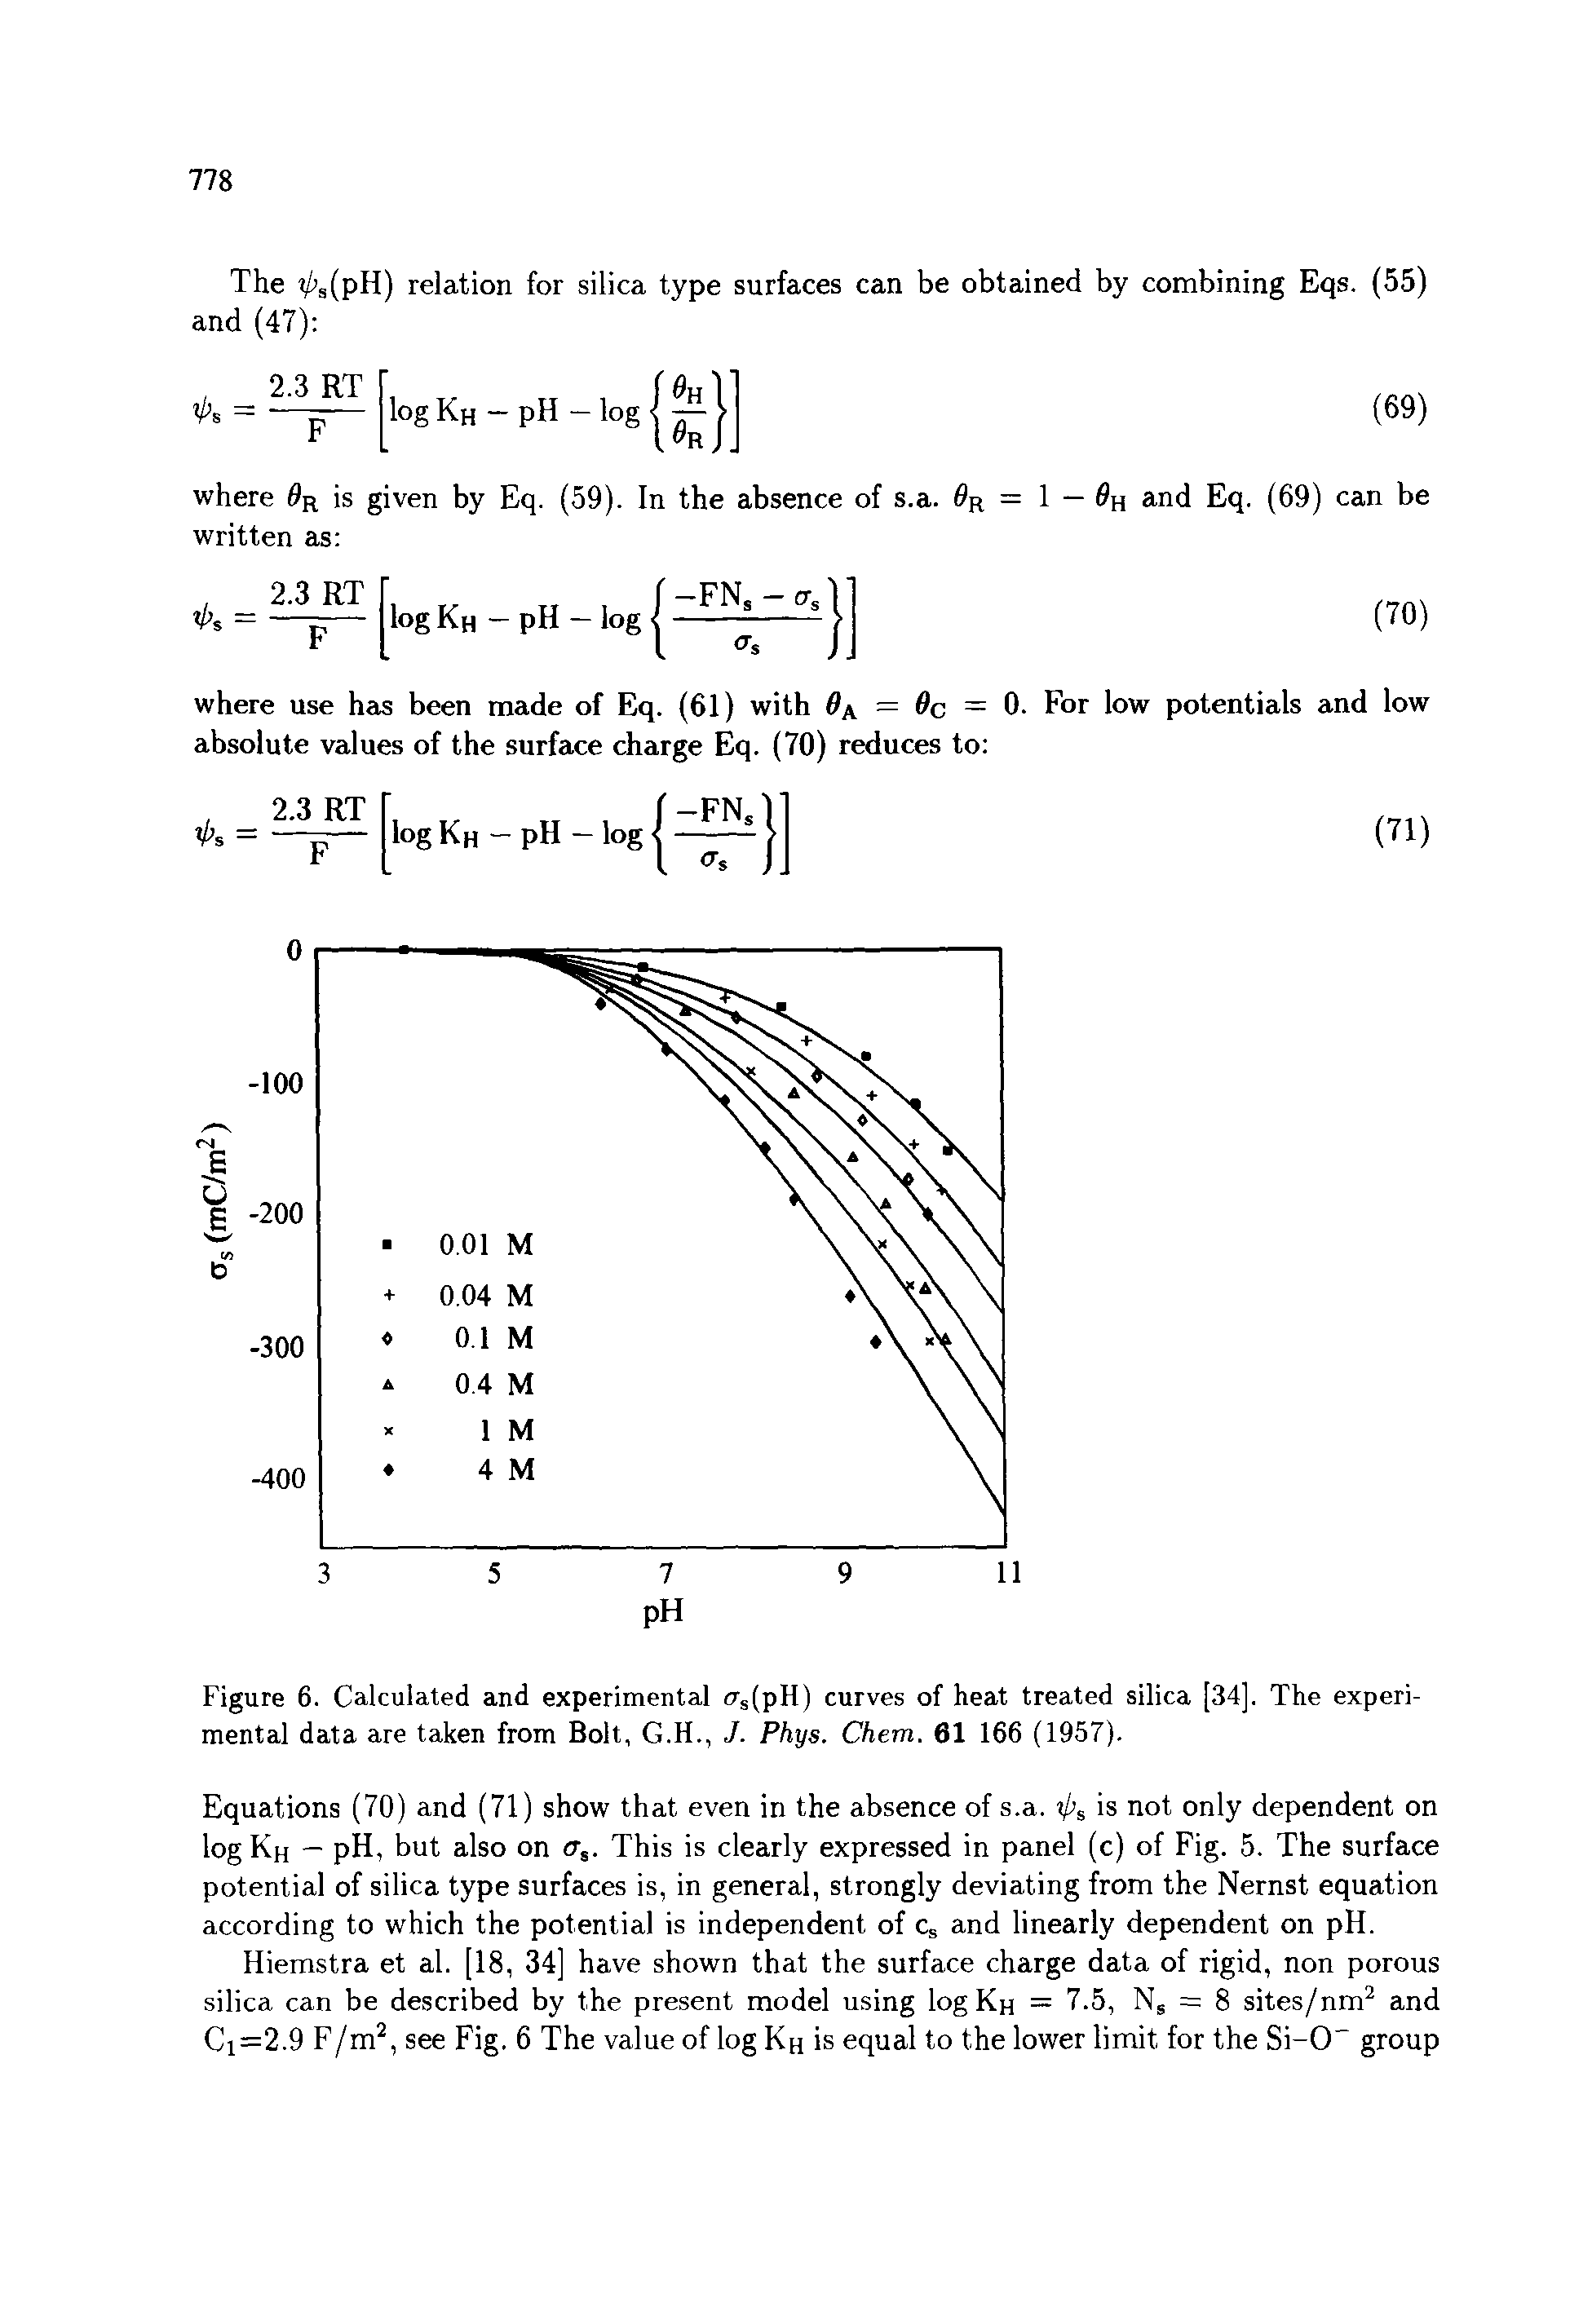 Figure 6. Calculated and experimental (Ts(pH) curves of heat treated silica [34]. The experimental data are taken from Bolt, G.H., J. Phys. Chem. 61 166 (1957).